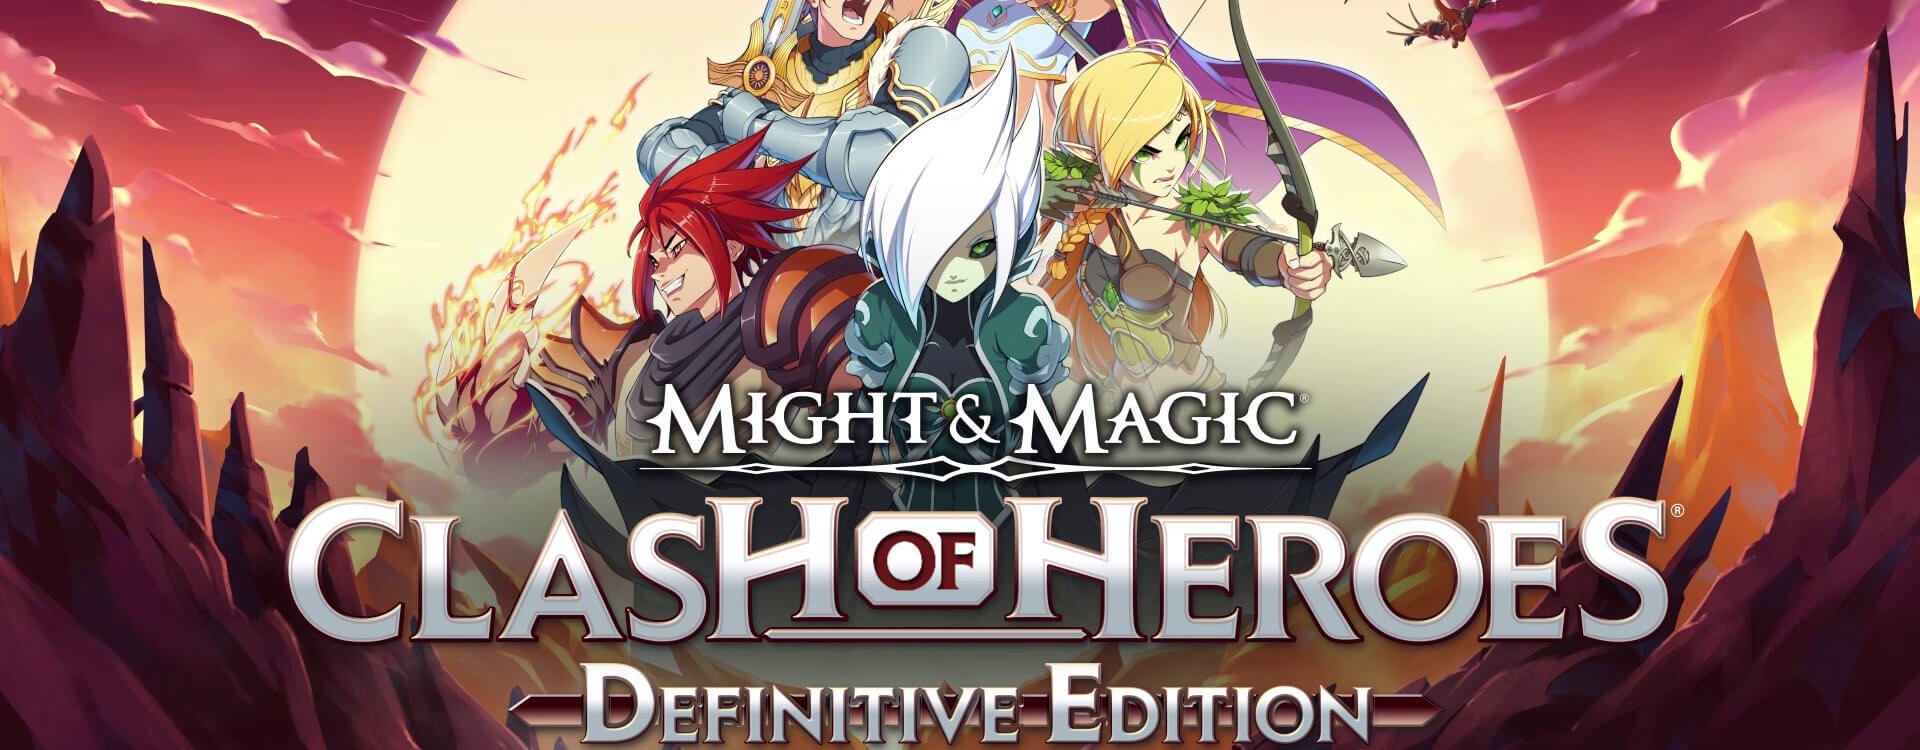 might-and-magic-clash-of-heroes-cover